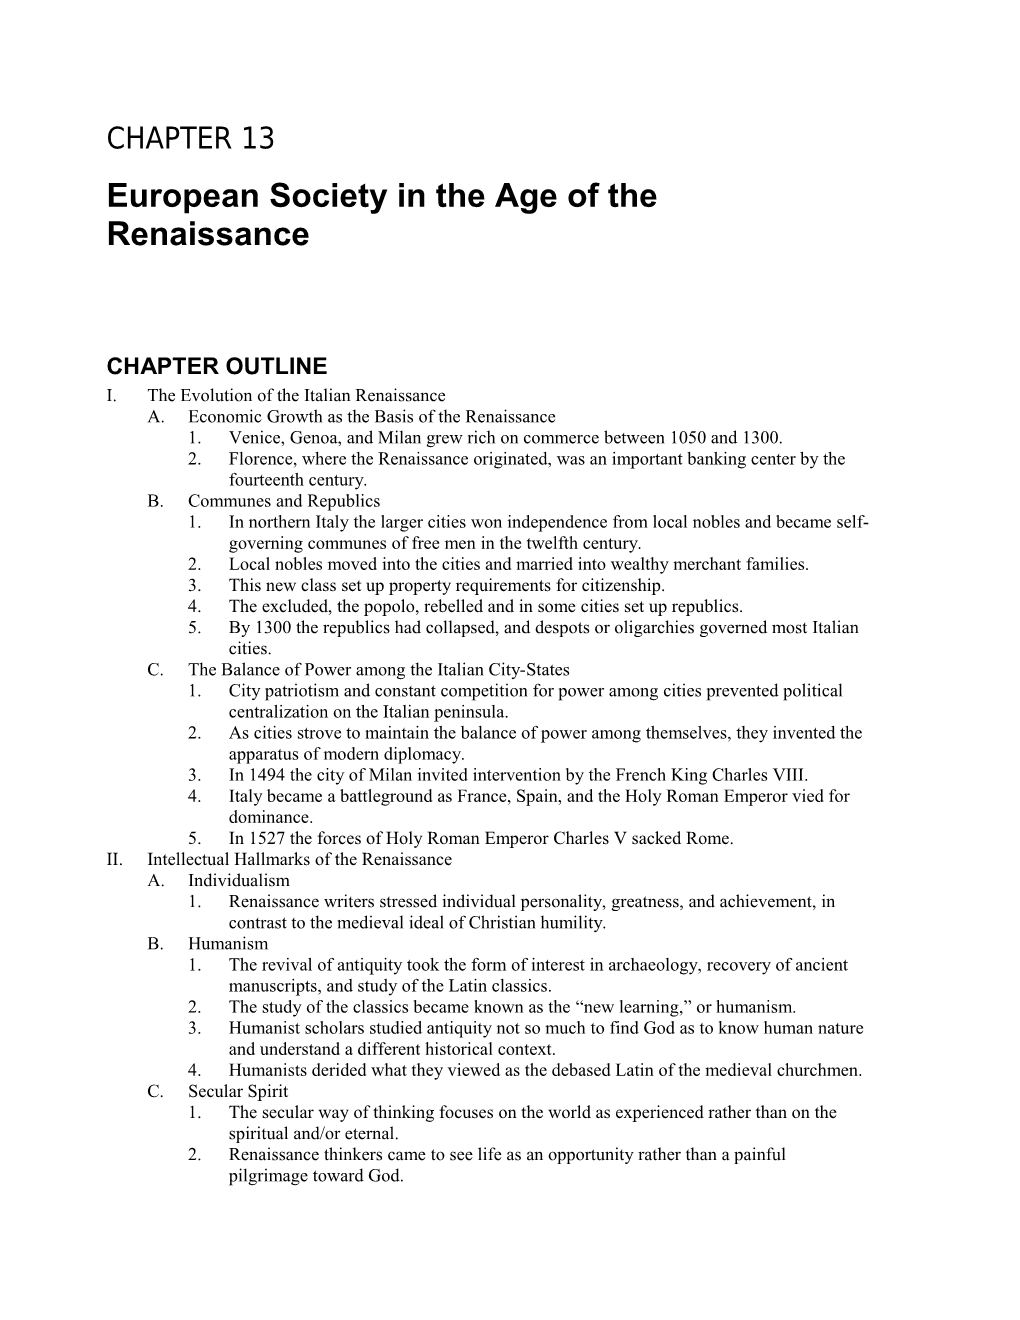 European Society in the Age of the Renaissance